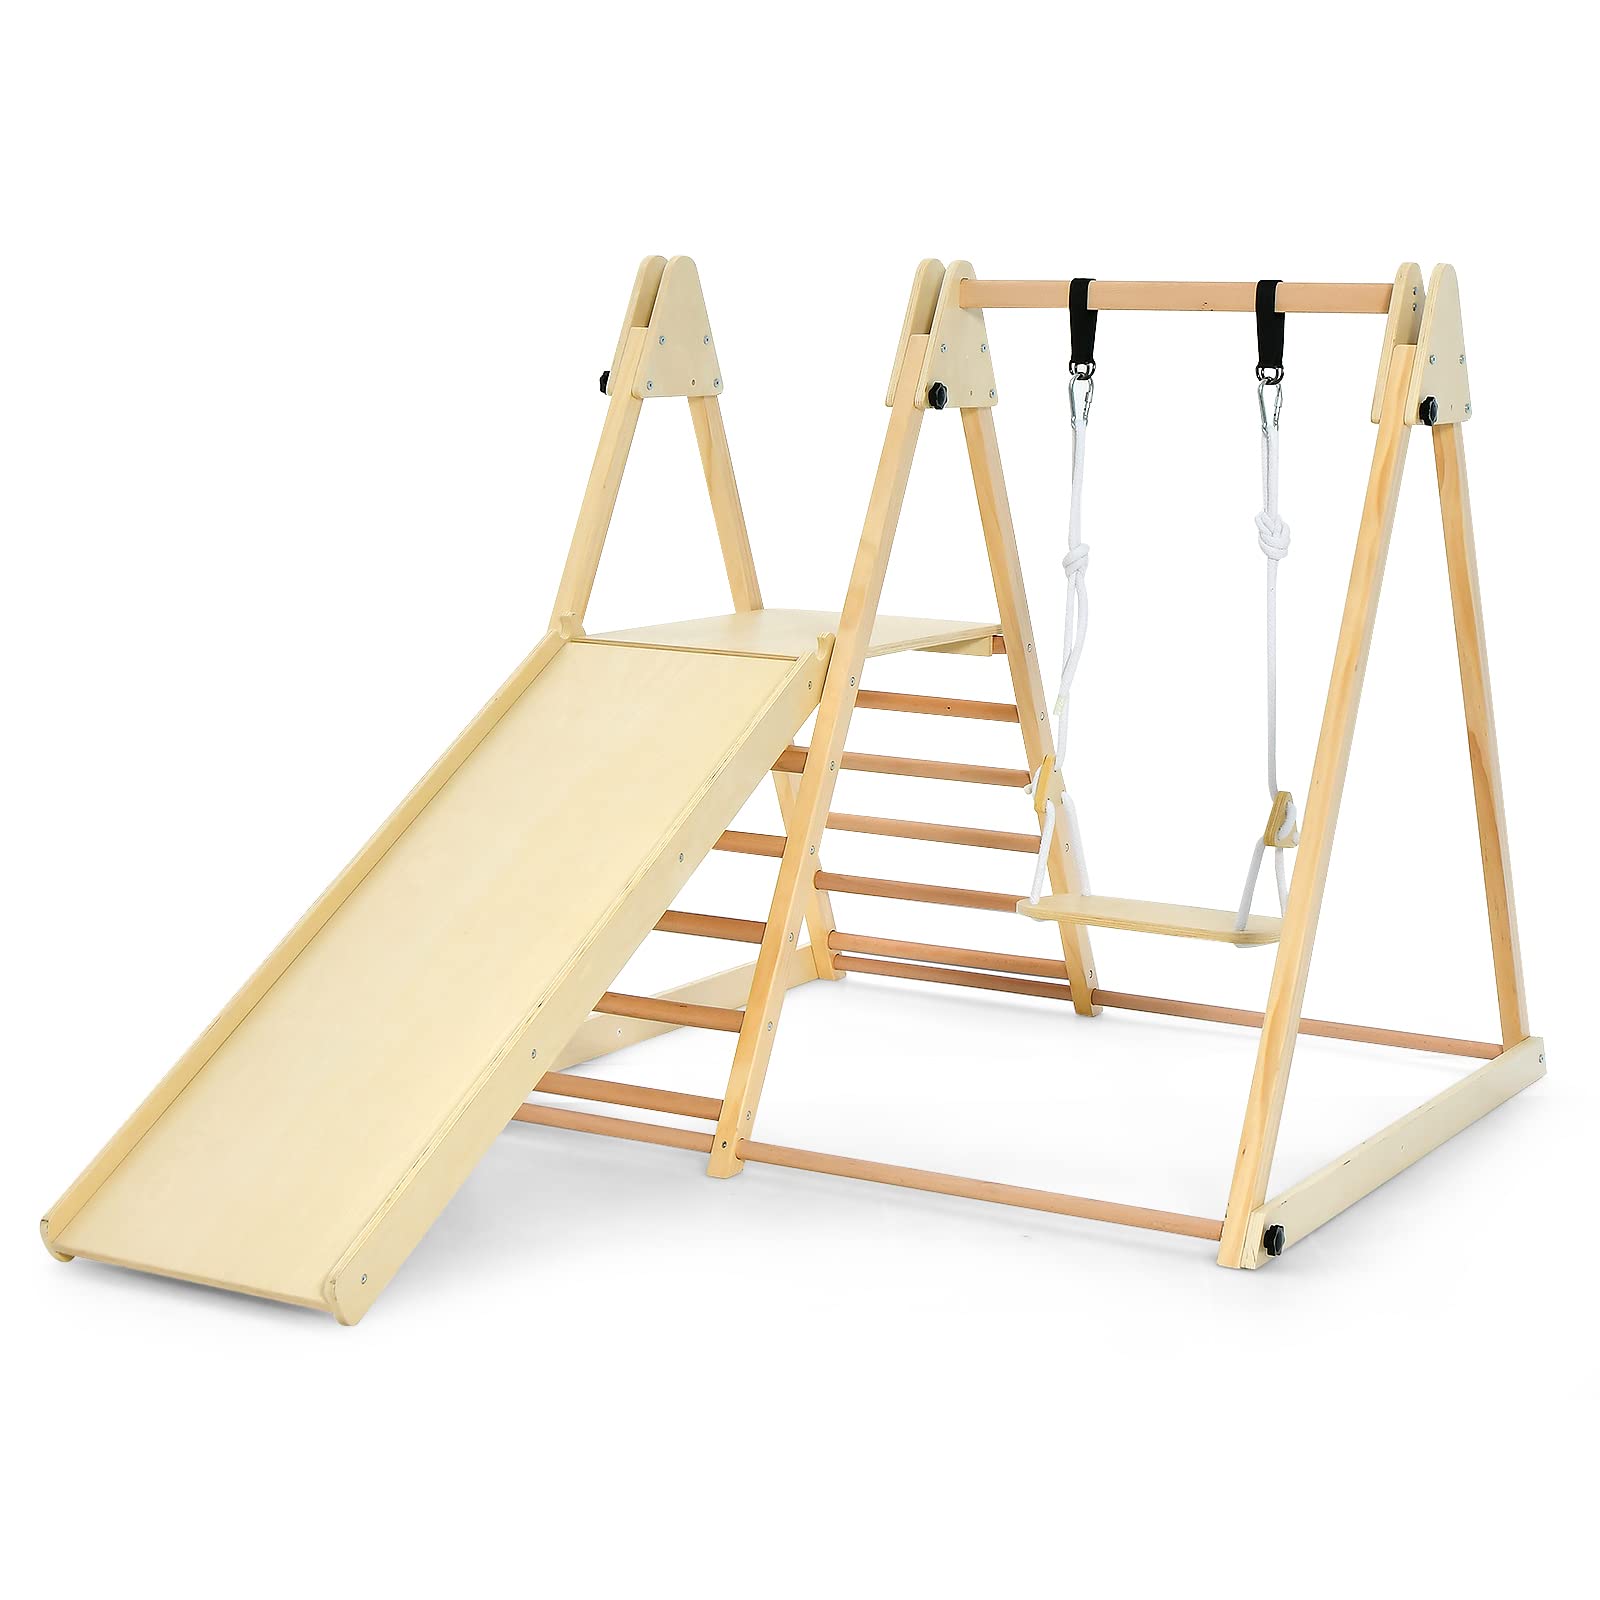 INFANS Kids Wooden Triangle Climber, Toddler Climbing Toys with 3 Different  Climbing Ladders, Indoor Playful Climbing Toys with Stable Structure, Gift